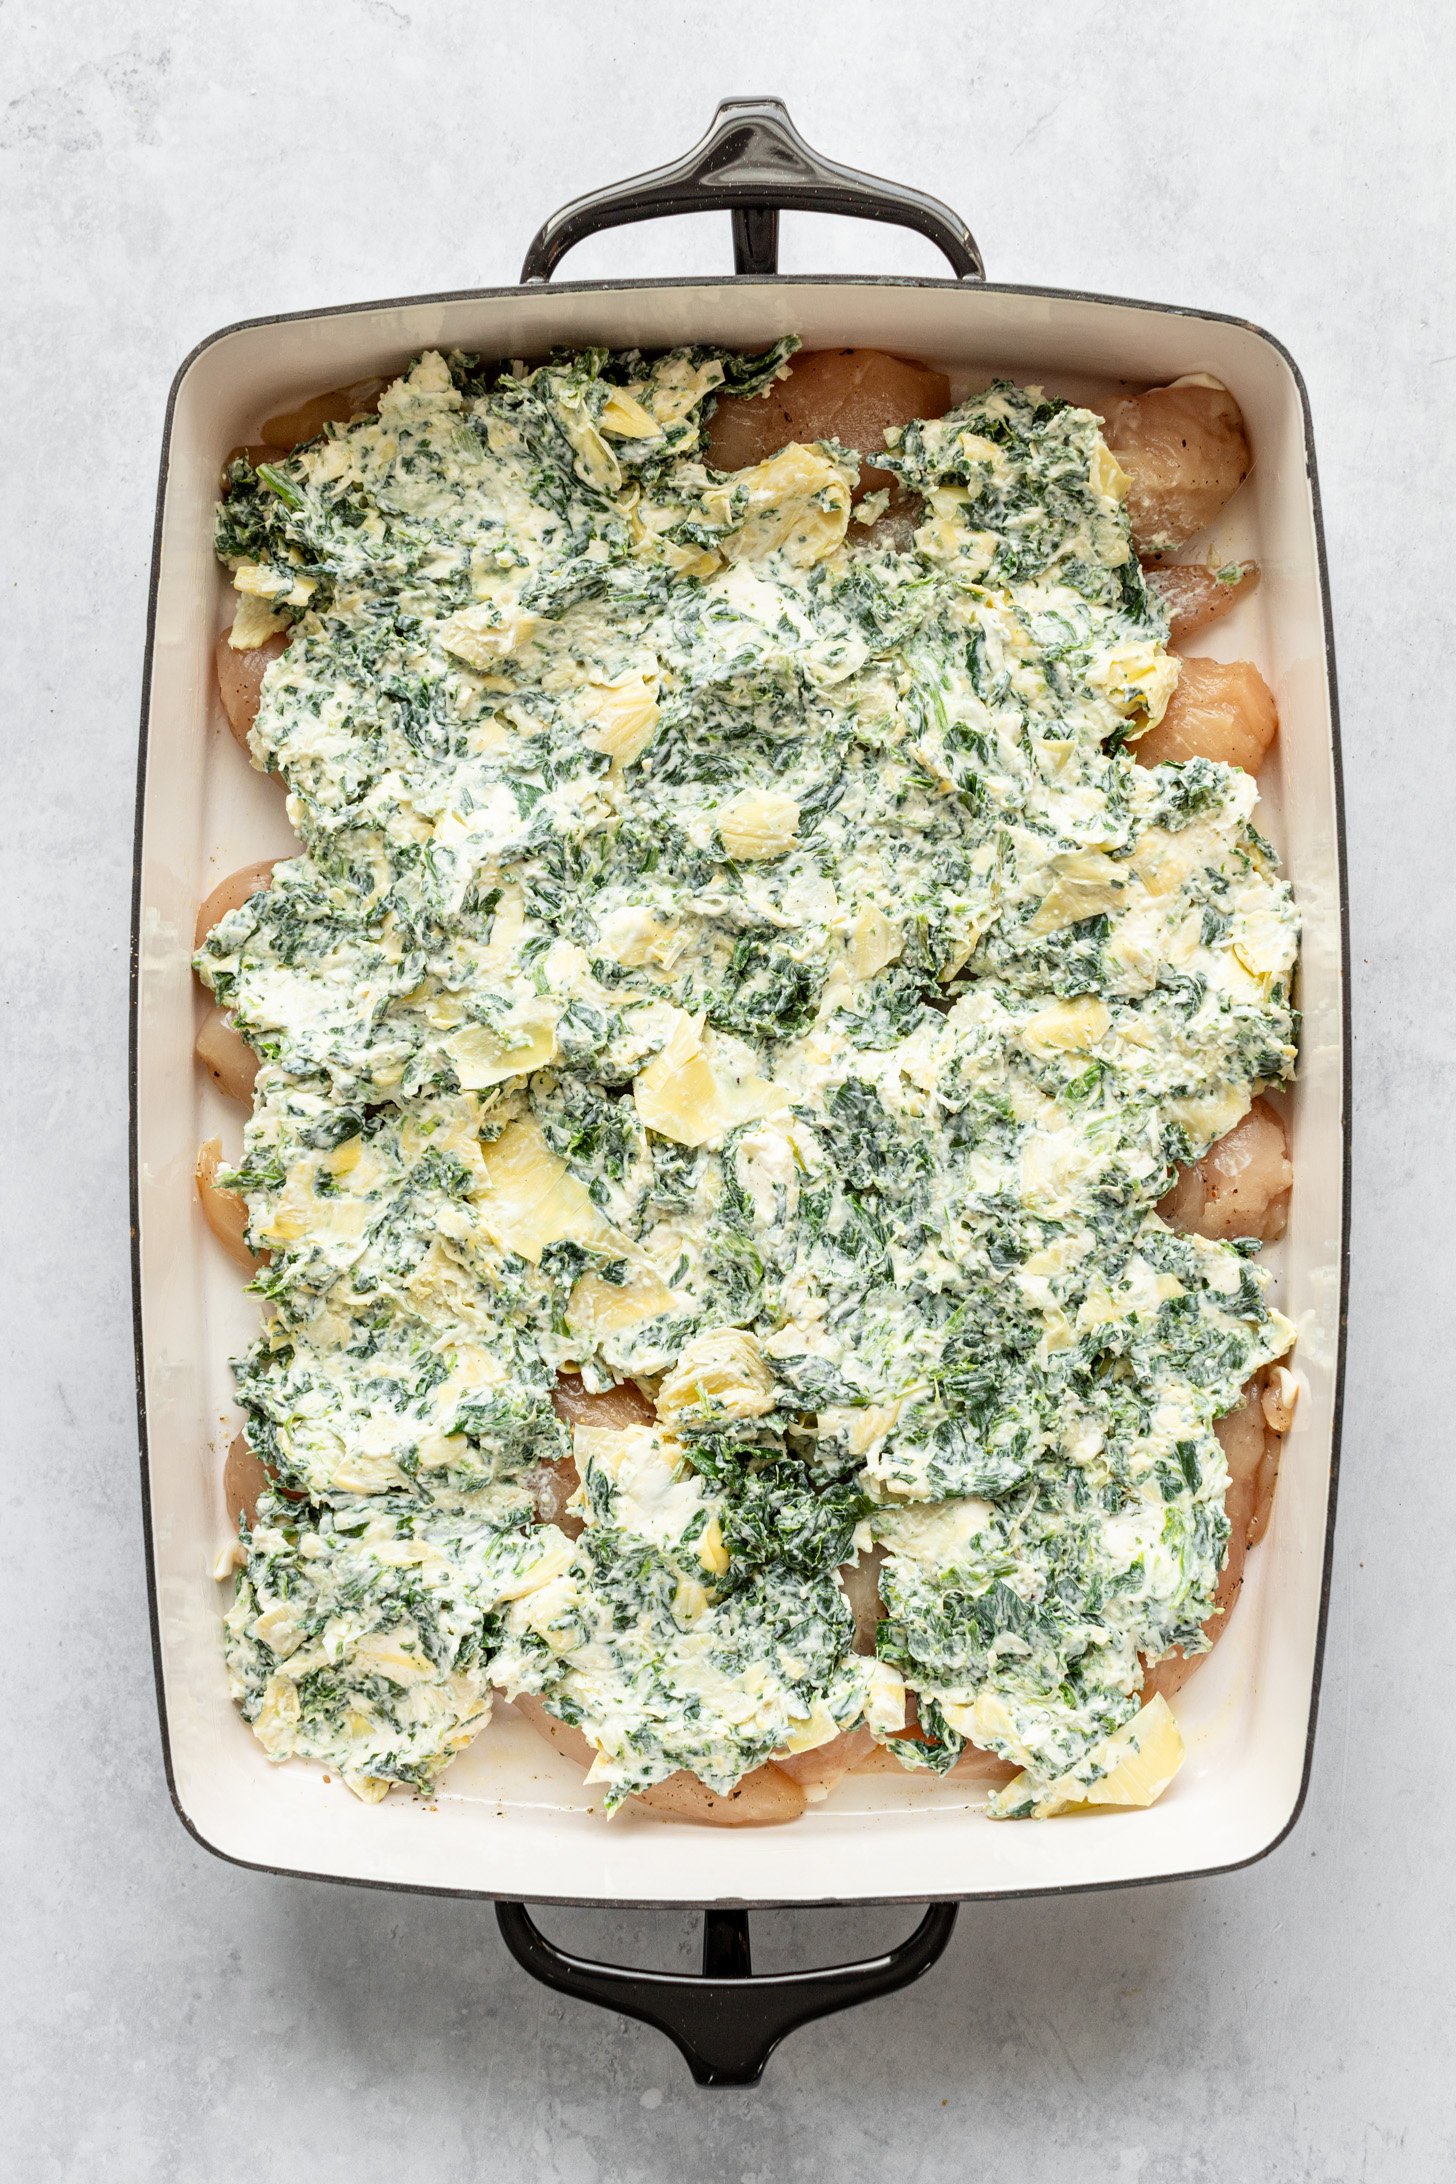 A casserole dish filled with raw chcken breasts topped with cream cheese mixture spread in an even layer. Casserole dish is sitting on a countertop.